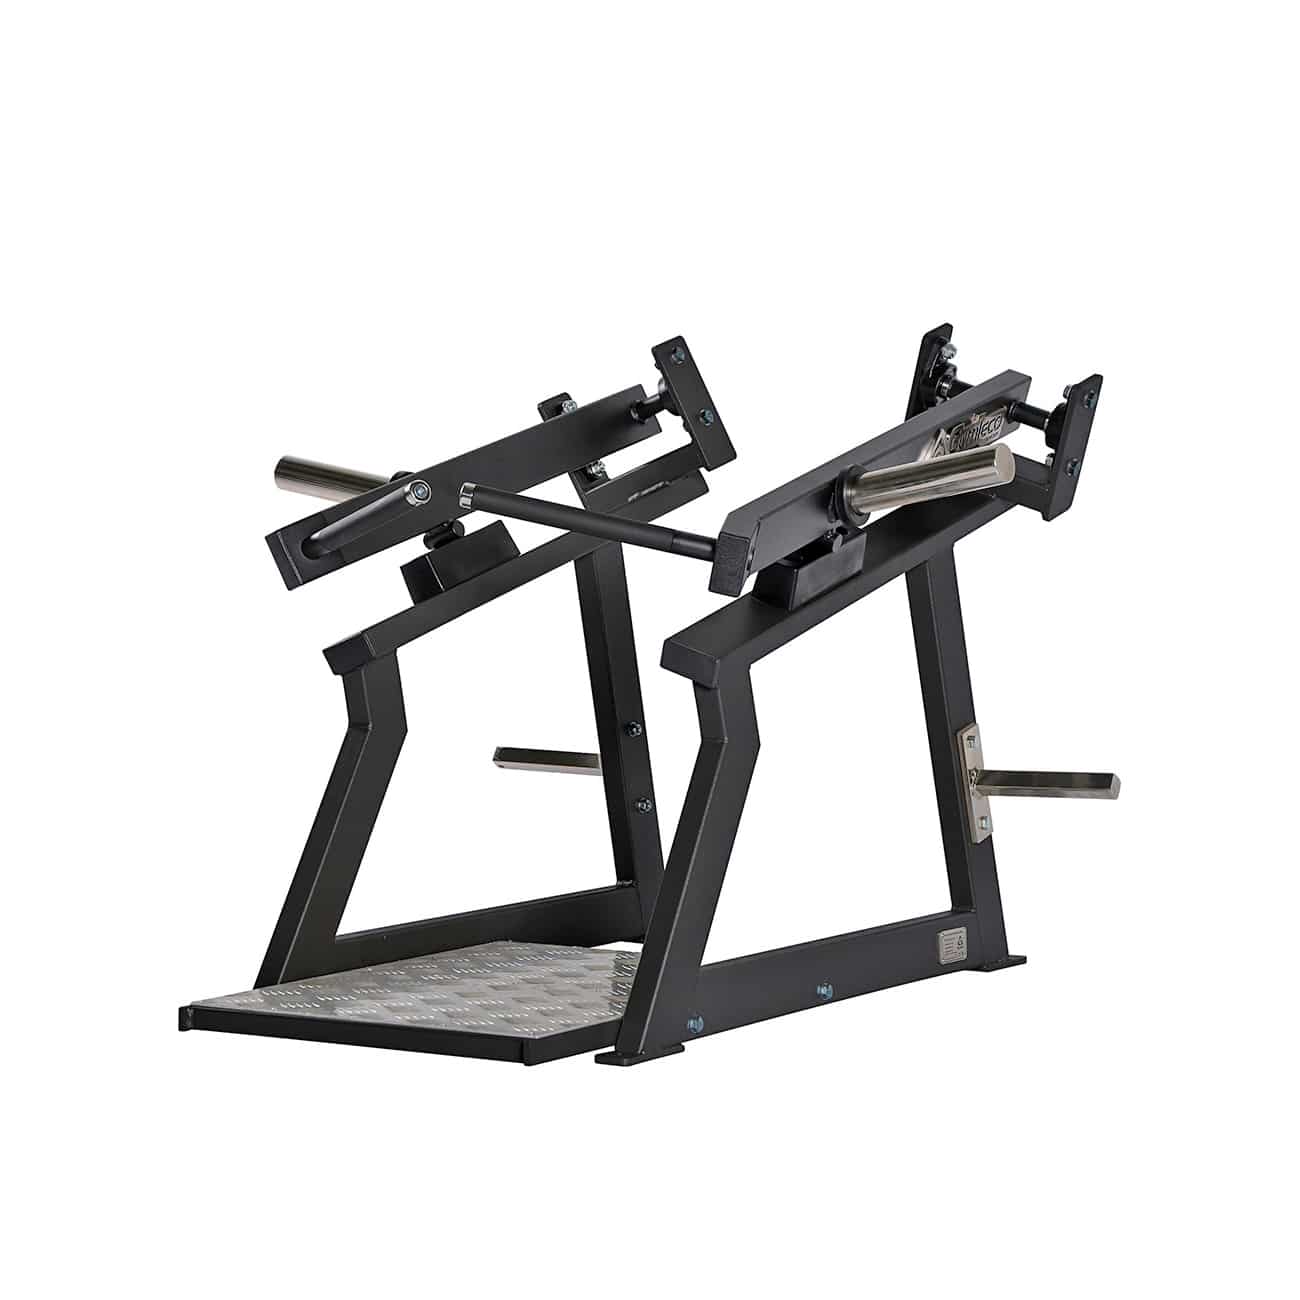 Upright row gym machine from Gymleco, product picture with white background